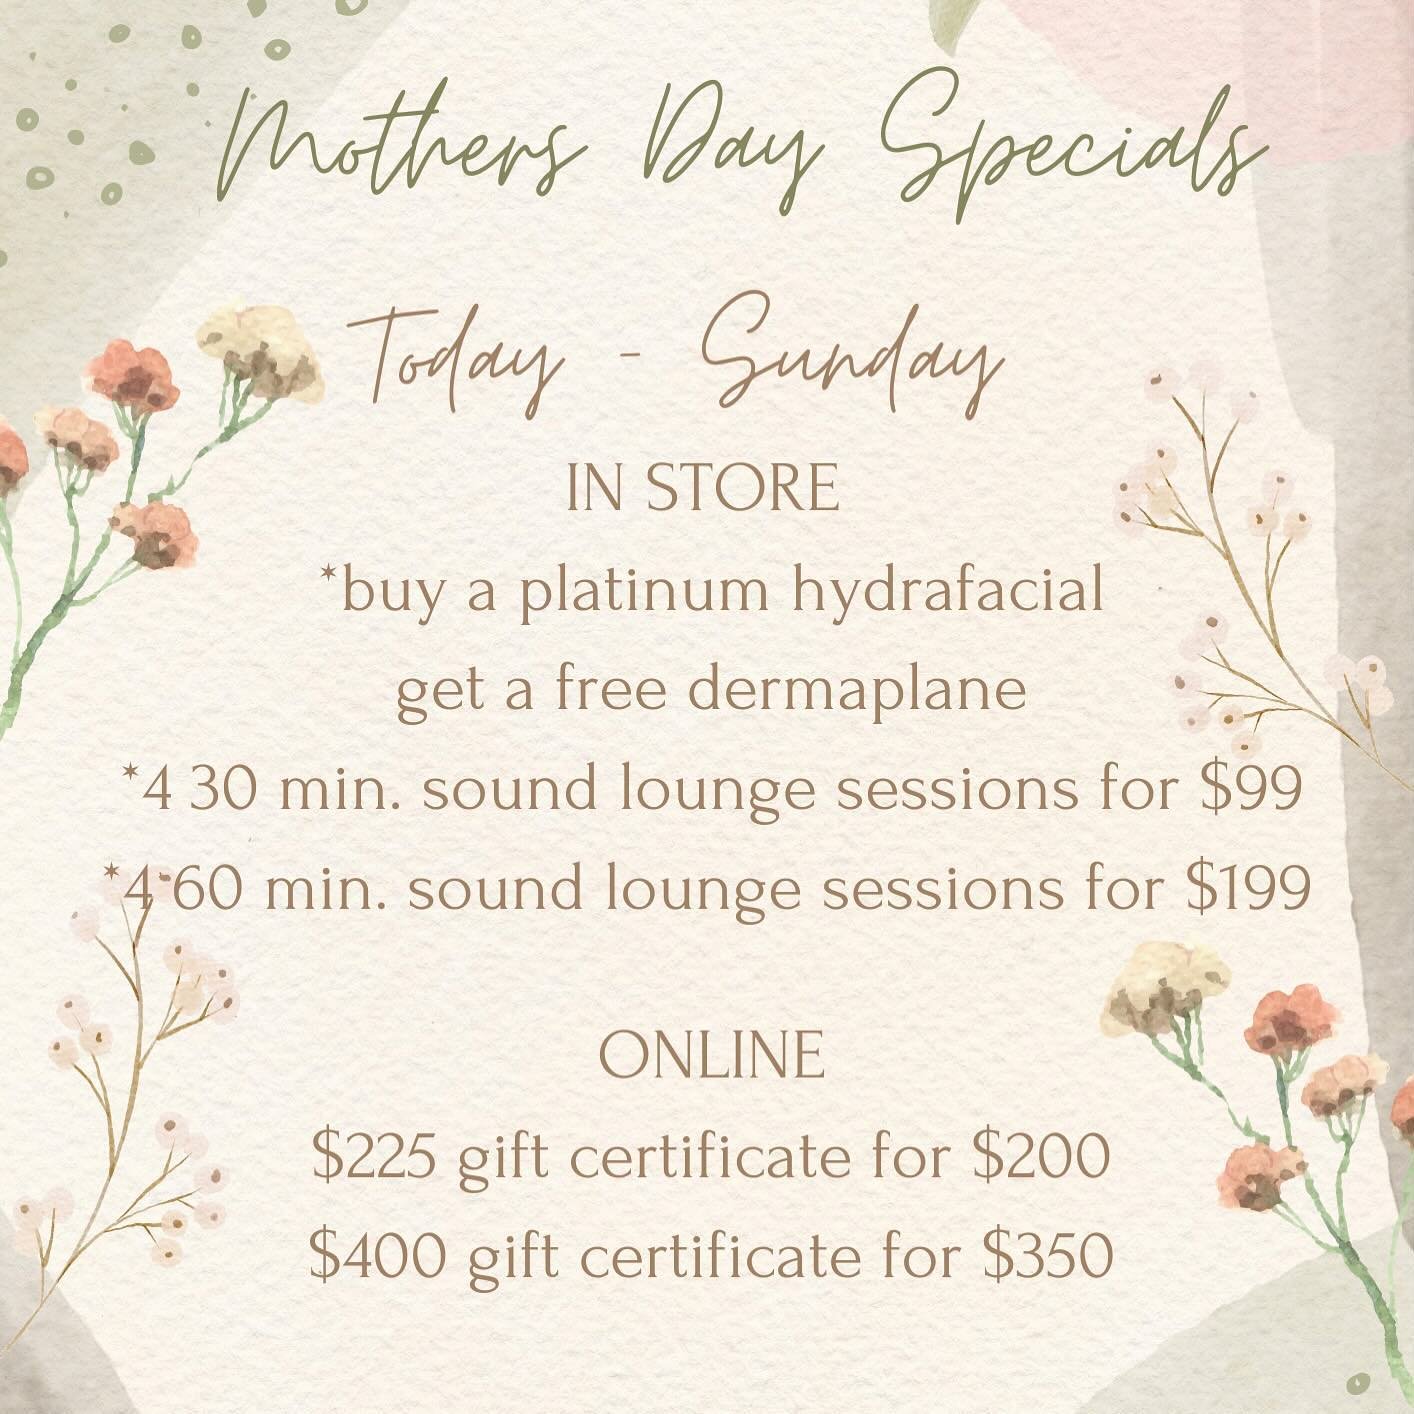 Mother&rsquo;s Day Specials!! 👏🏻💐 Today-Sunday 
Come see us in store for some specials and check out some online!! ☺️🛍️
#wincbeauty #littlerocksalon #arkansas #mothersday